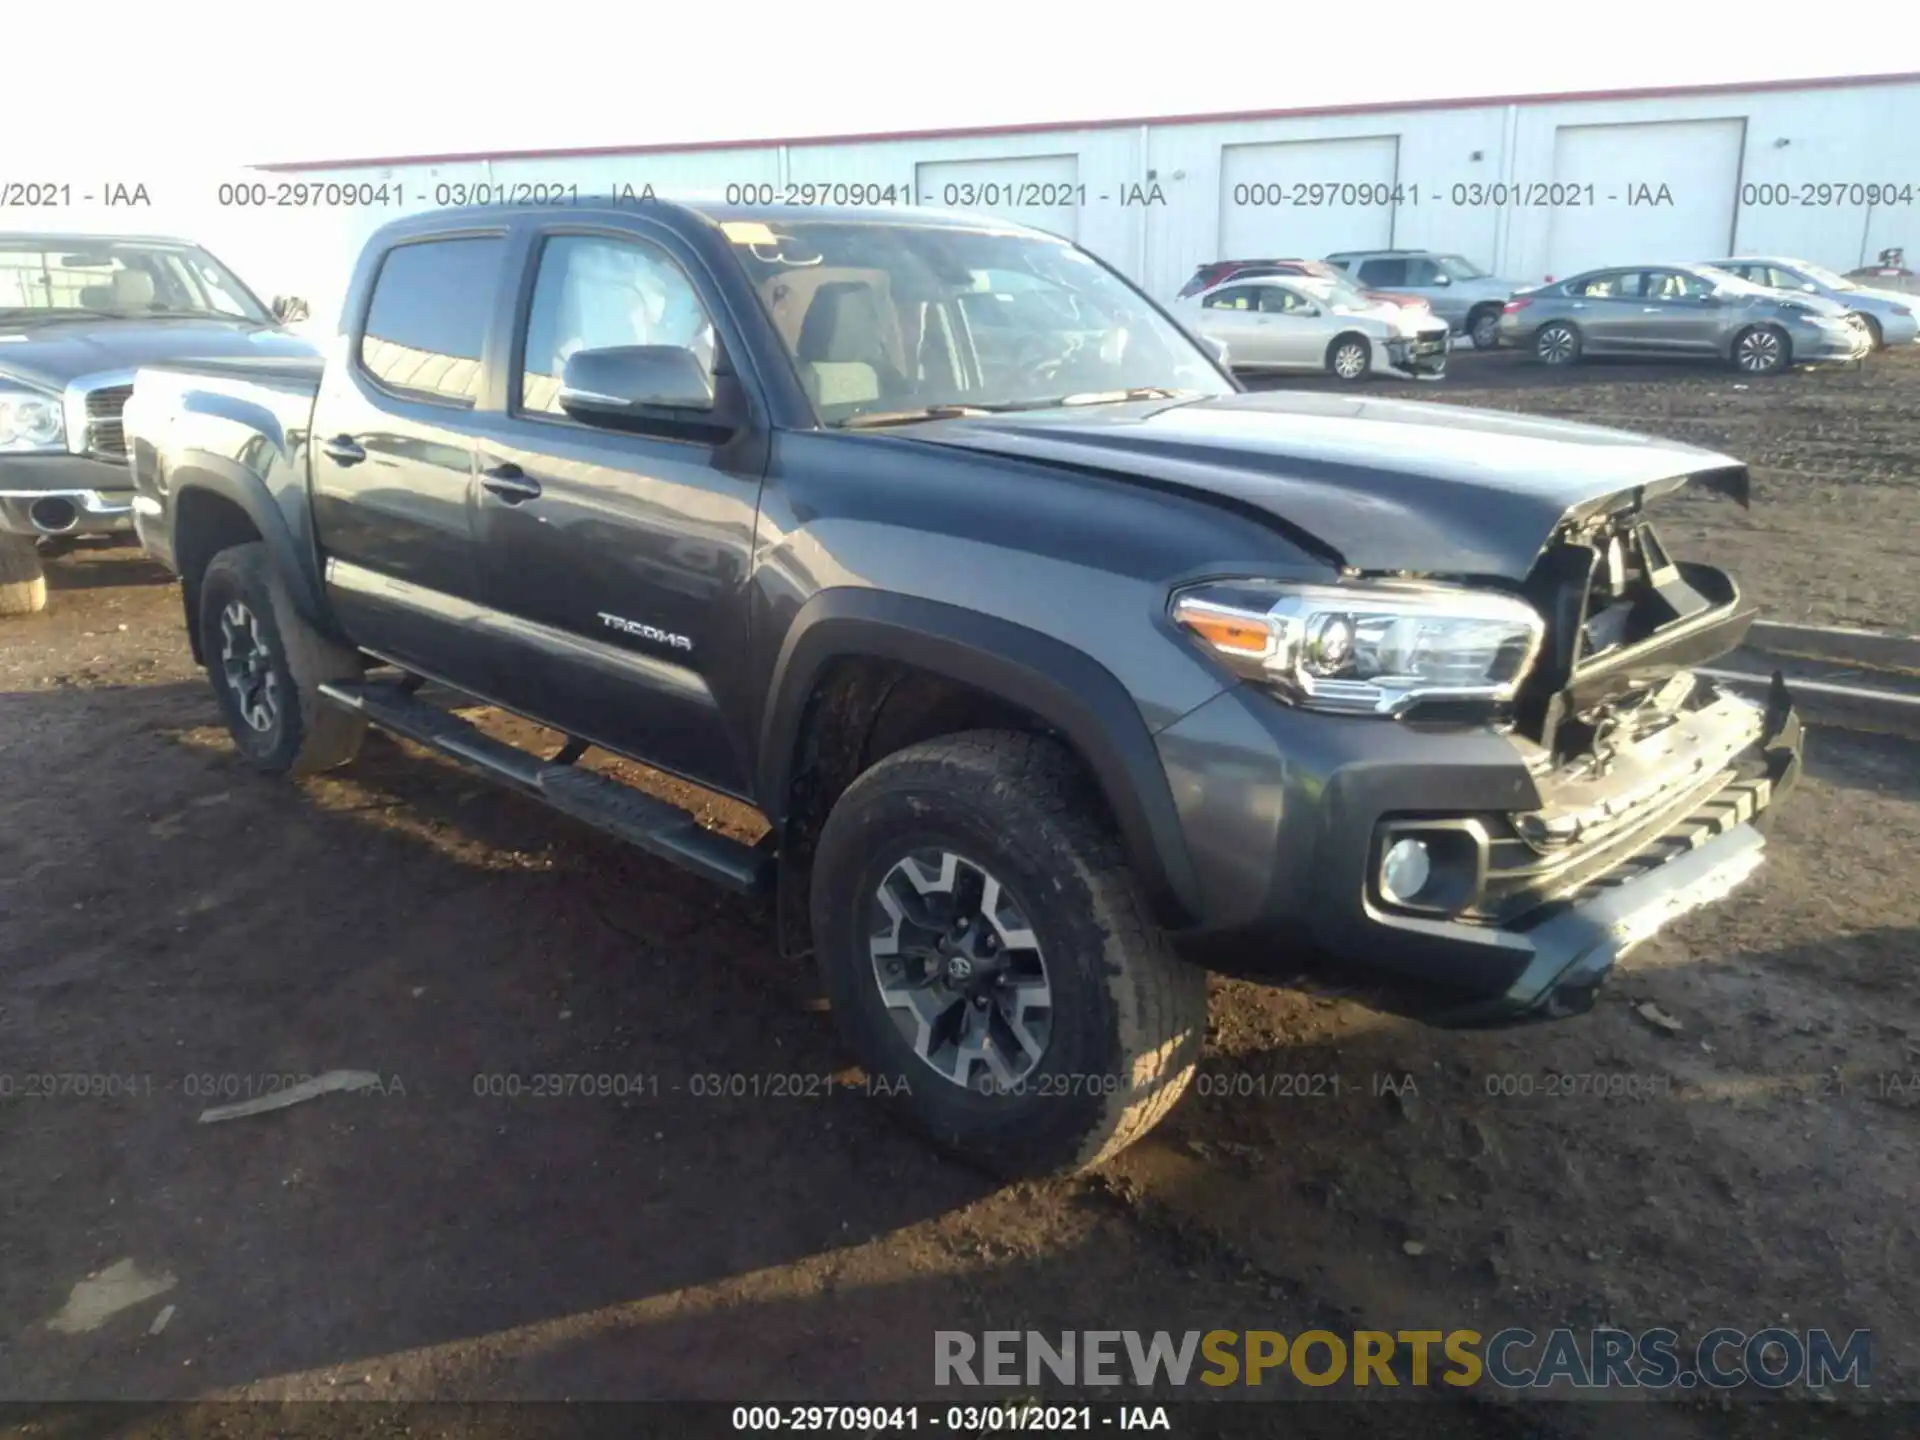 1 Photograph of a damaged car 3TMCZ5ANXLM288153 TOYOTA TACOMA 4WD 2020